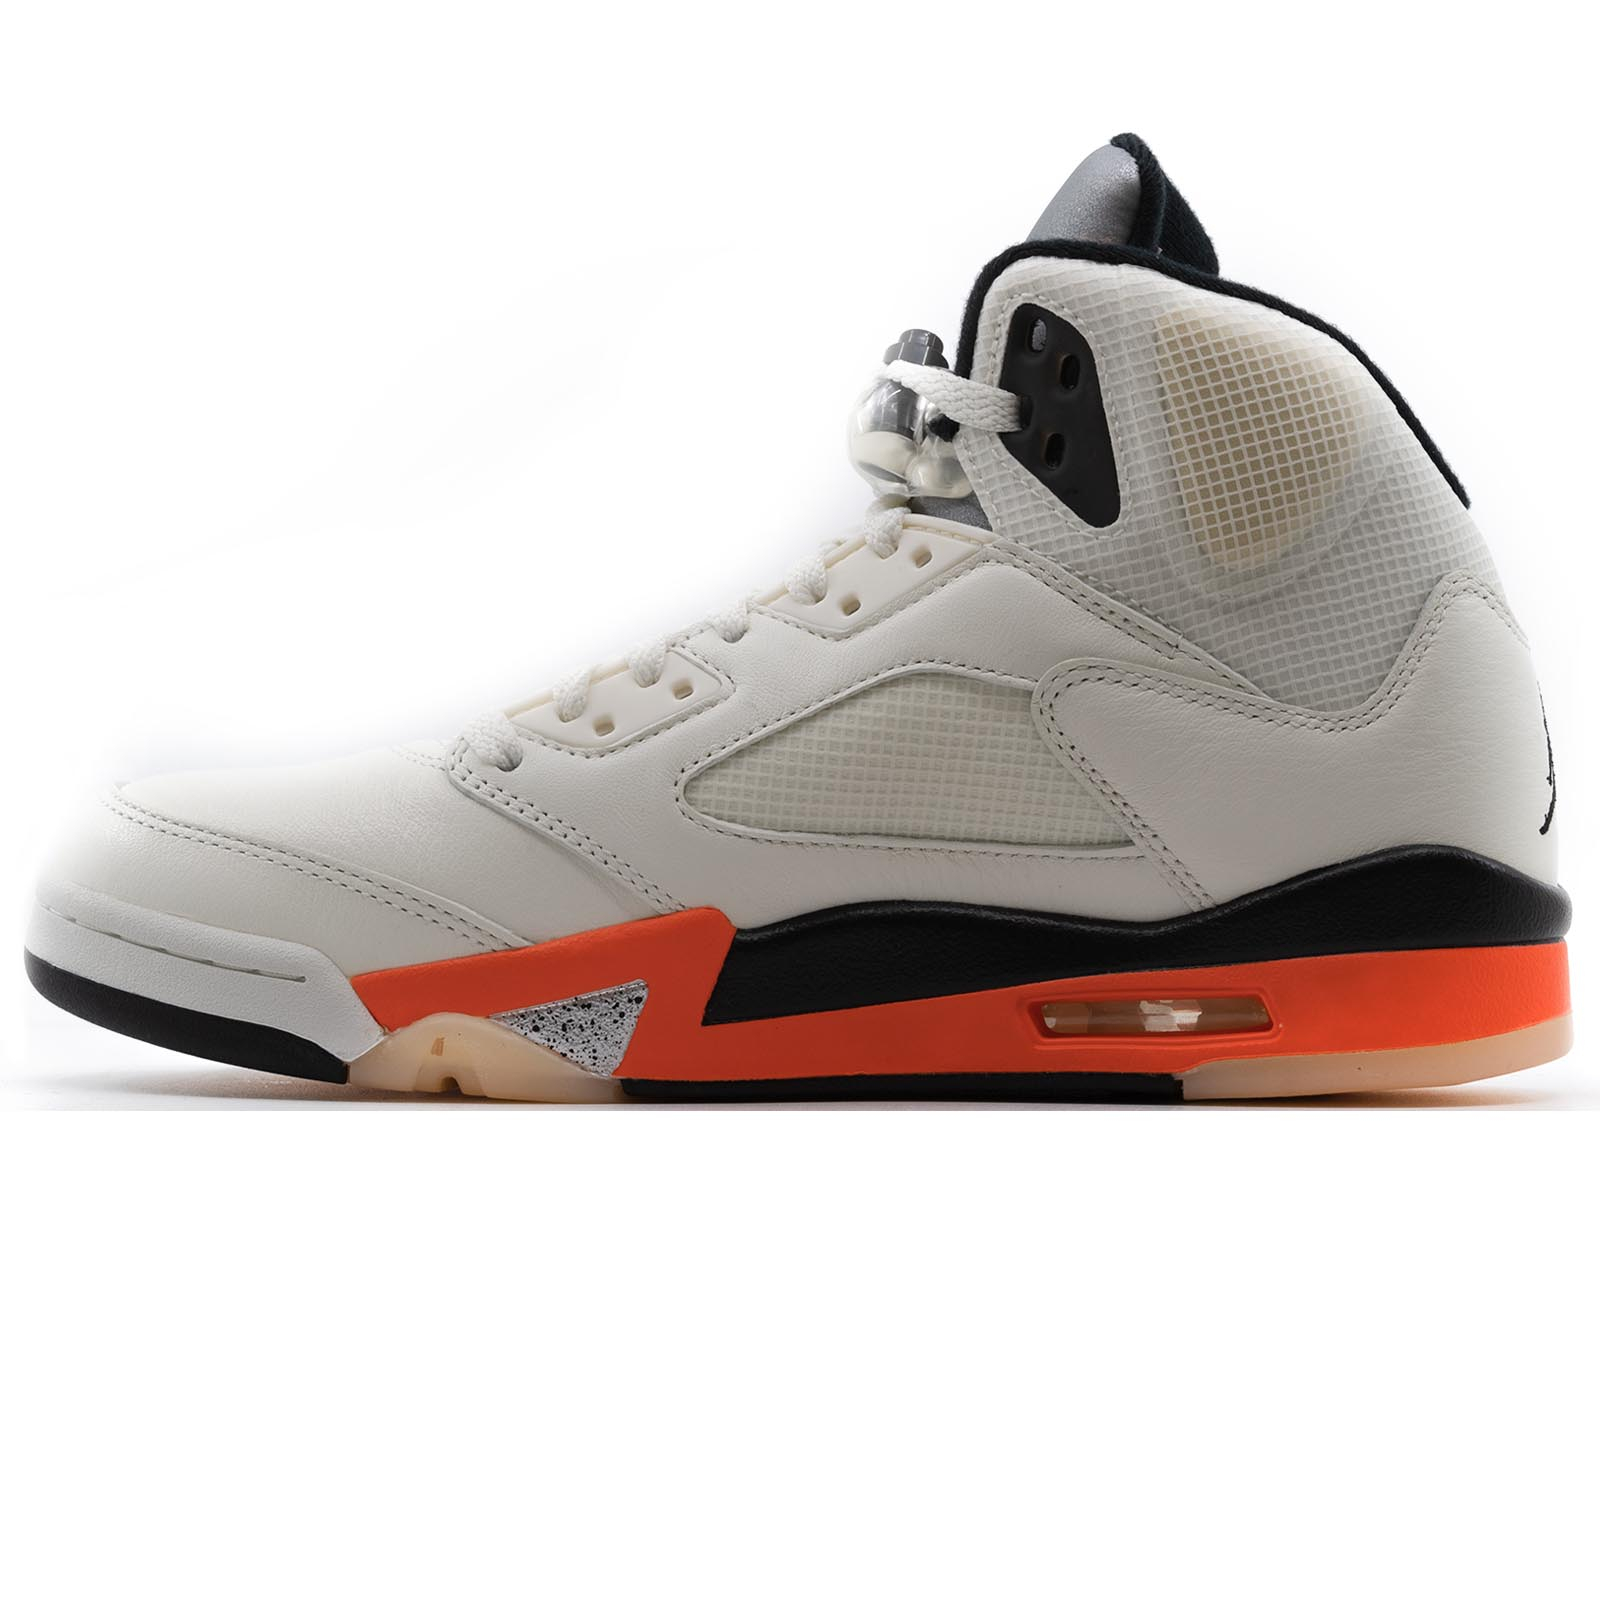 how much are the jordan retro 5